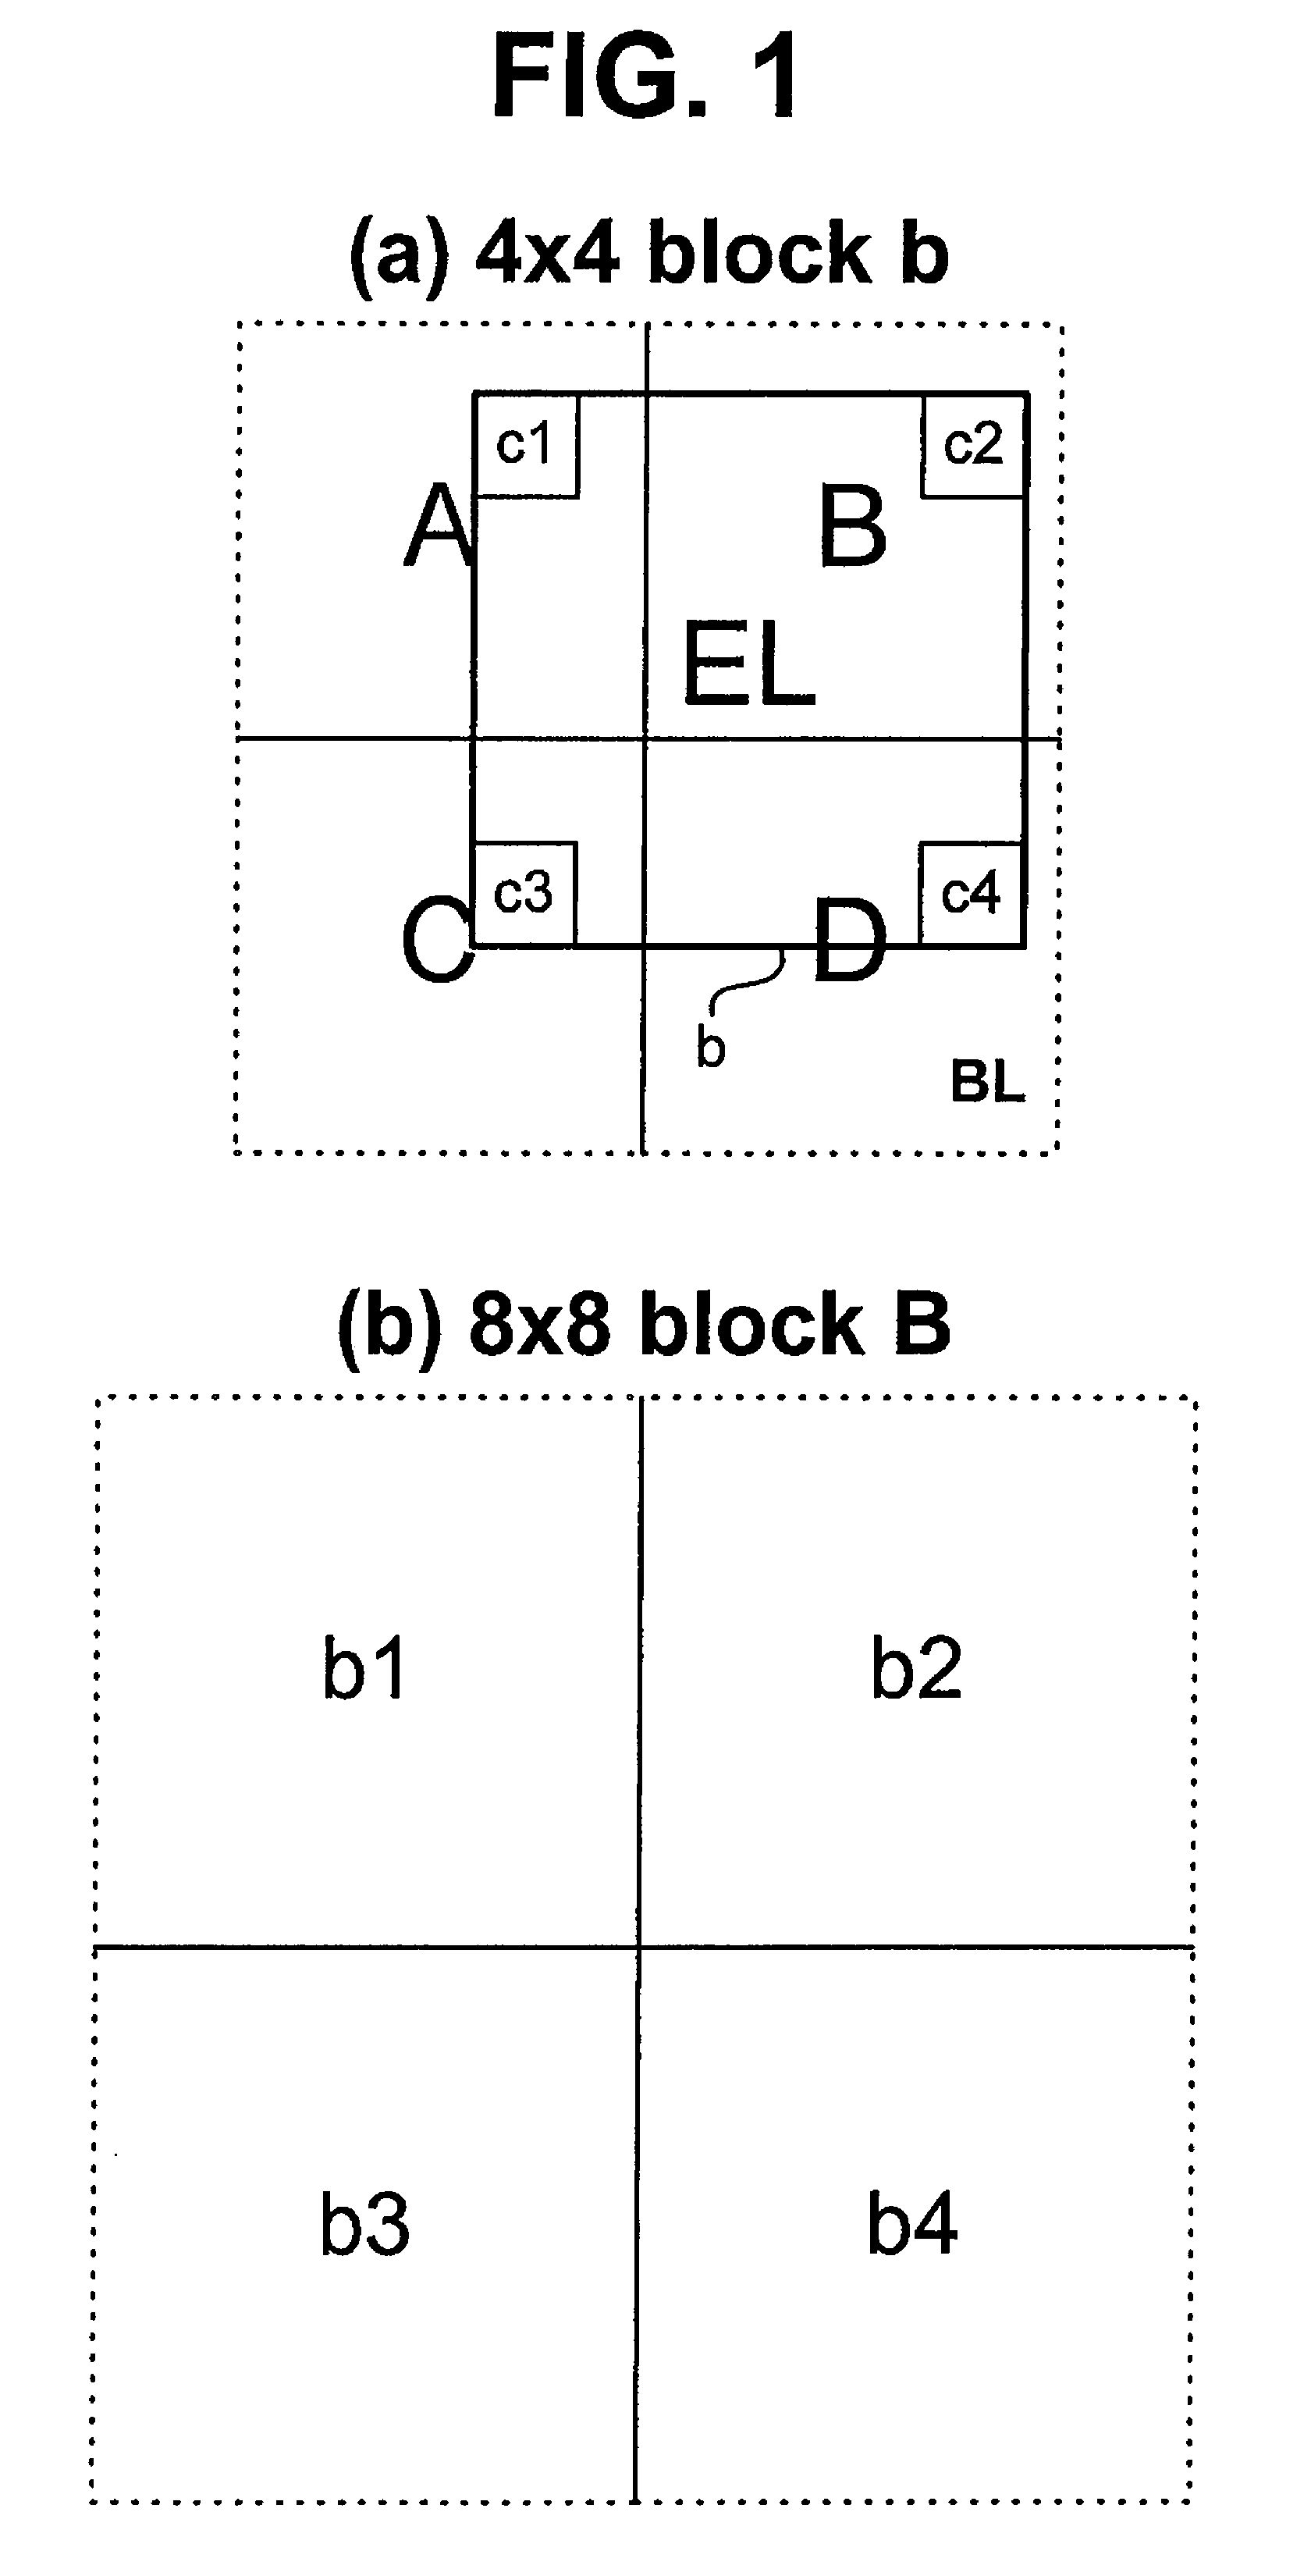 Method for scalably encoding and decoding video signal